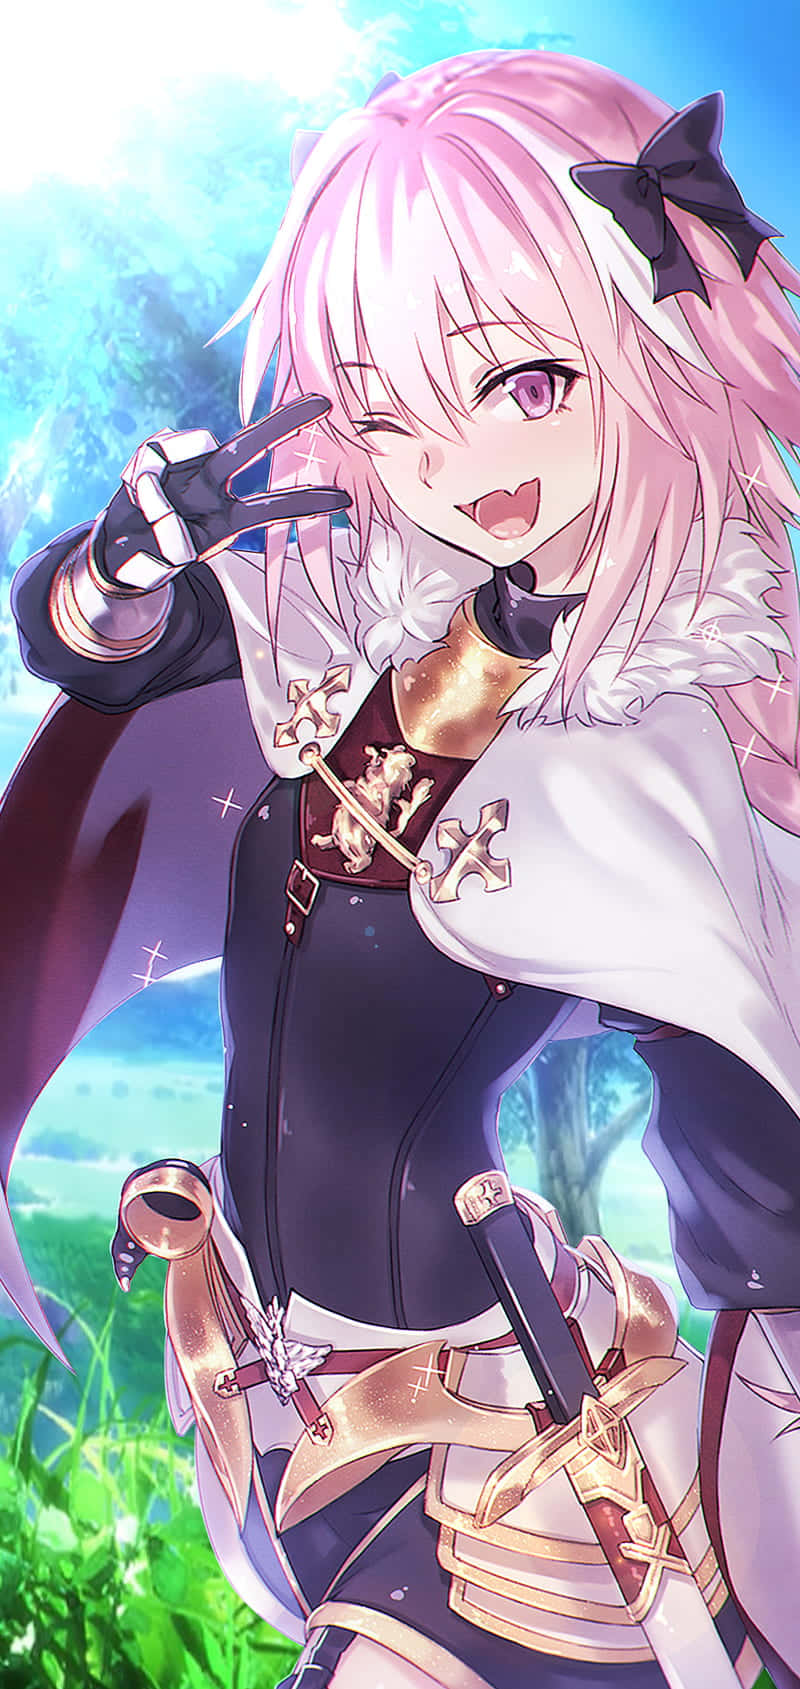 “A fan of Astolfo from Fate/Grand Order”